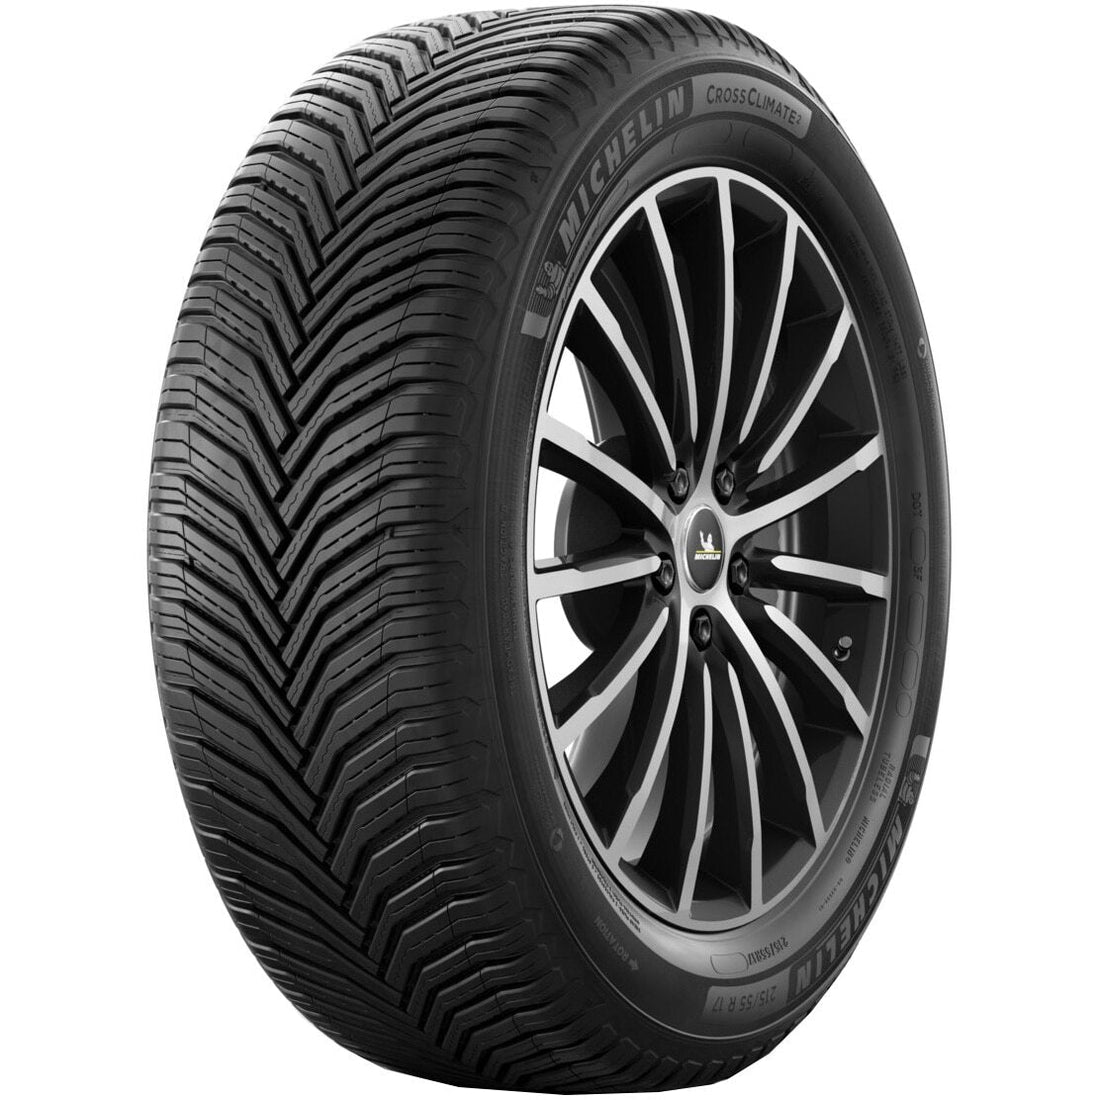 Anvelope All-season Michelin Crossclimate 2 suv 265/45R20 108 Y Anvelux